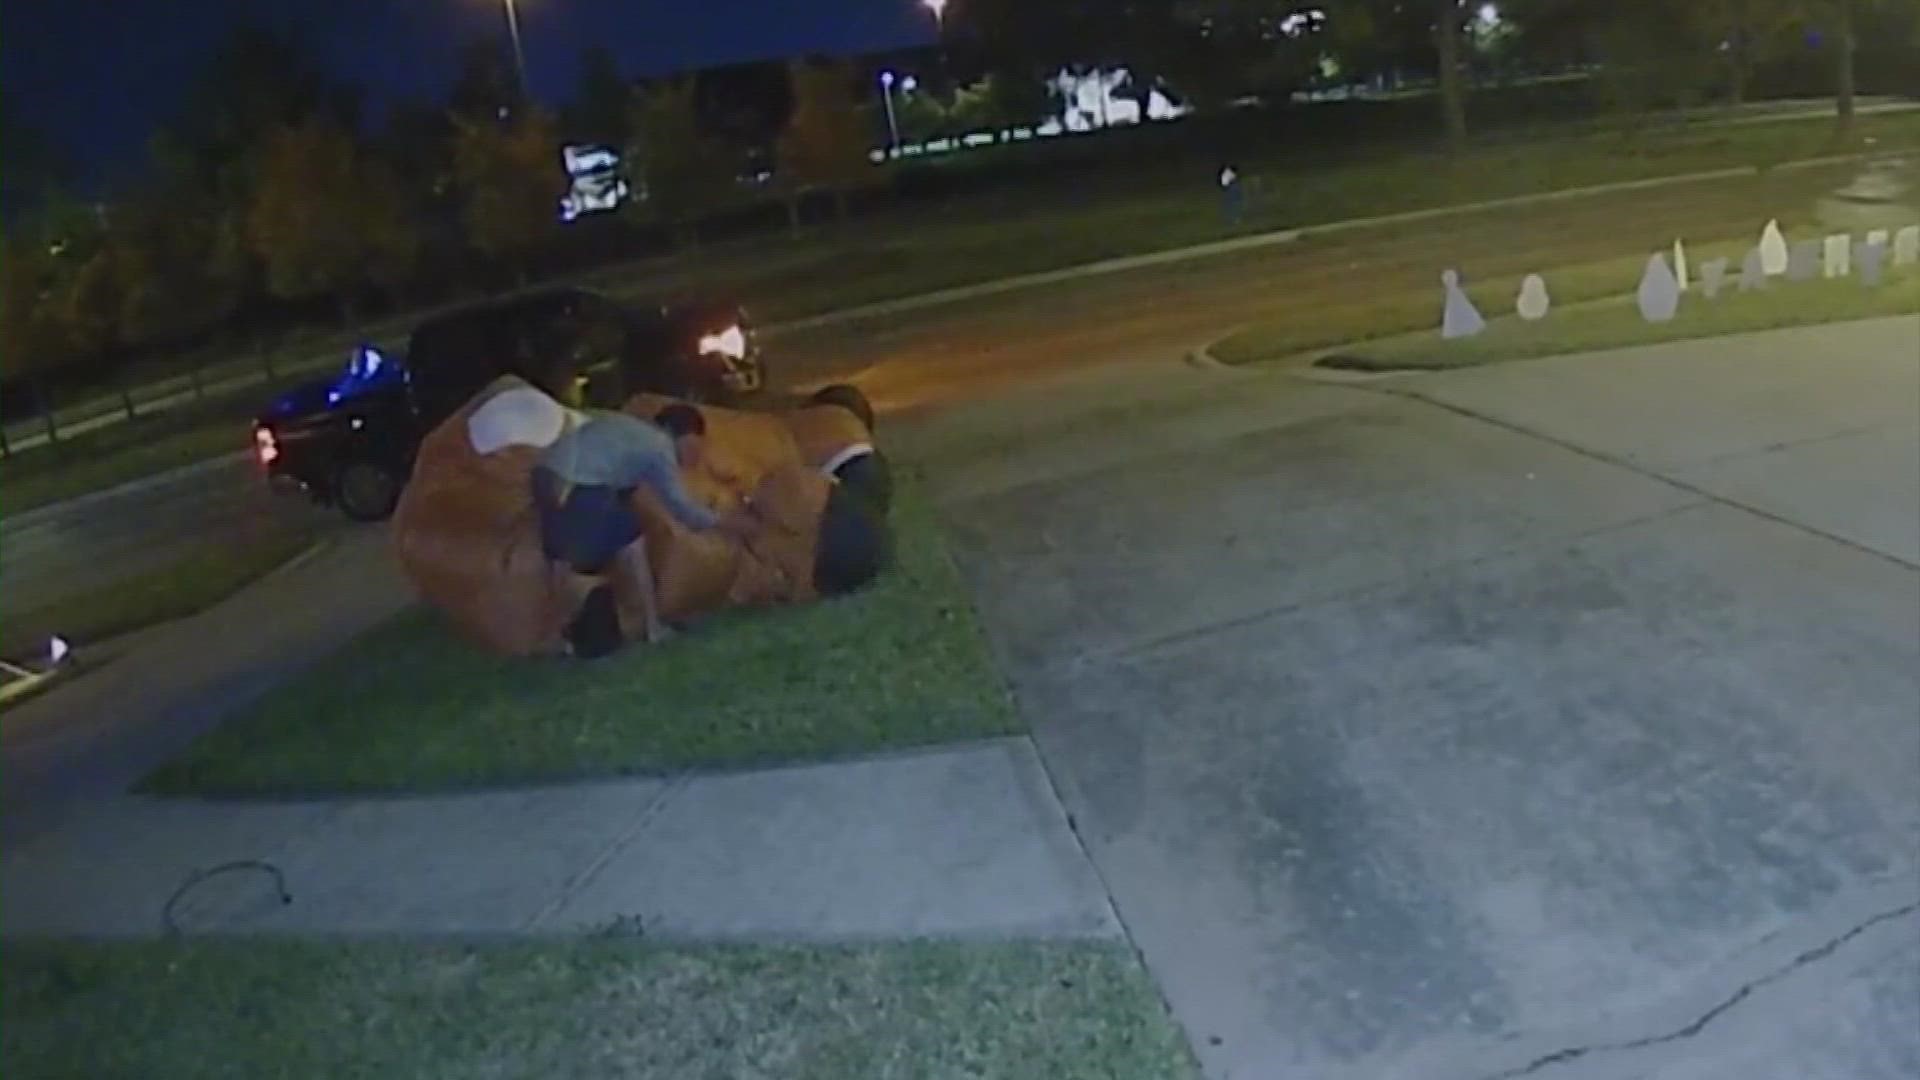 Brazen thieves were caught on camera stealing holiday décor in a northwest Houston neighborhood early Thursday morning.